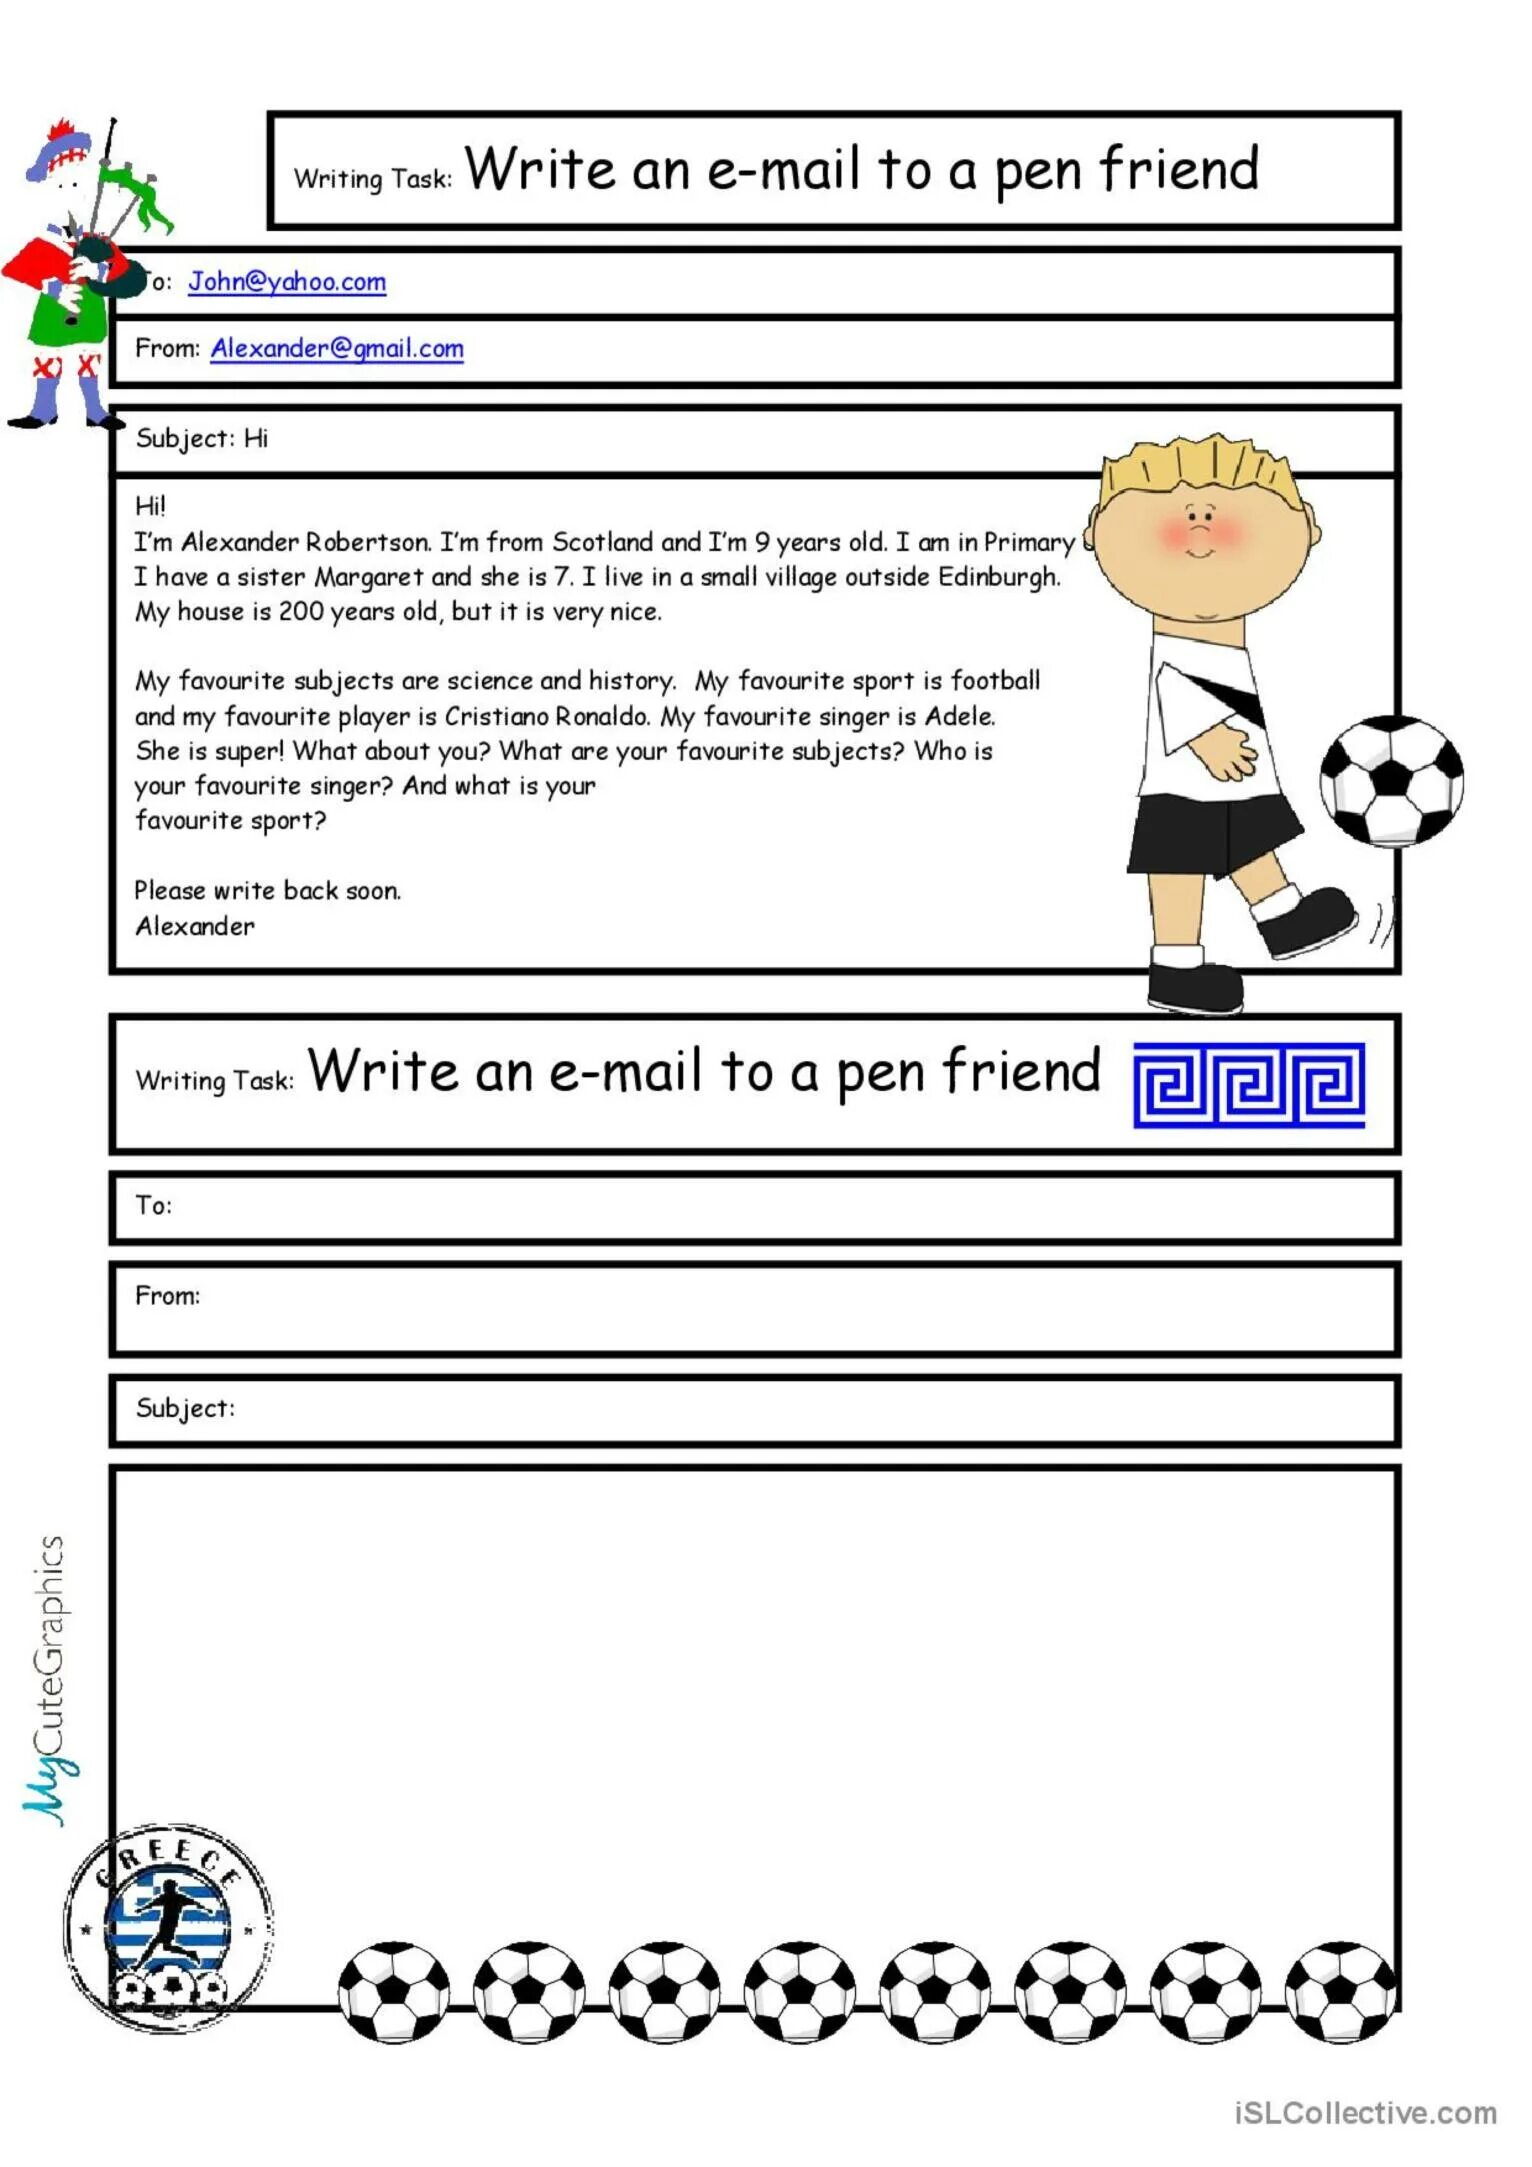 Task your pen friend. Writing an email 5 класс. Writing Formal email Worksheets. Writing an email Worksheets. Writing a Letter to a friend Worksheets.